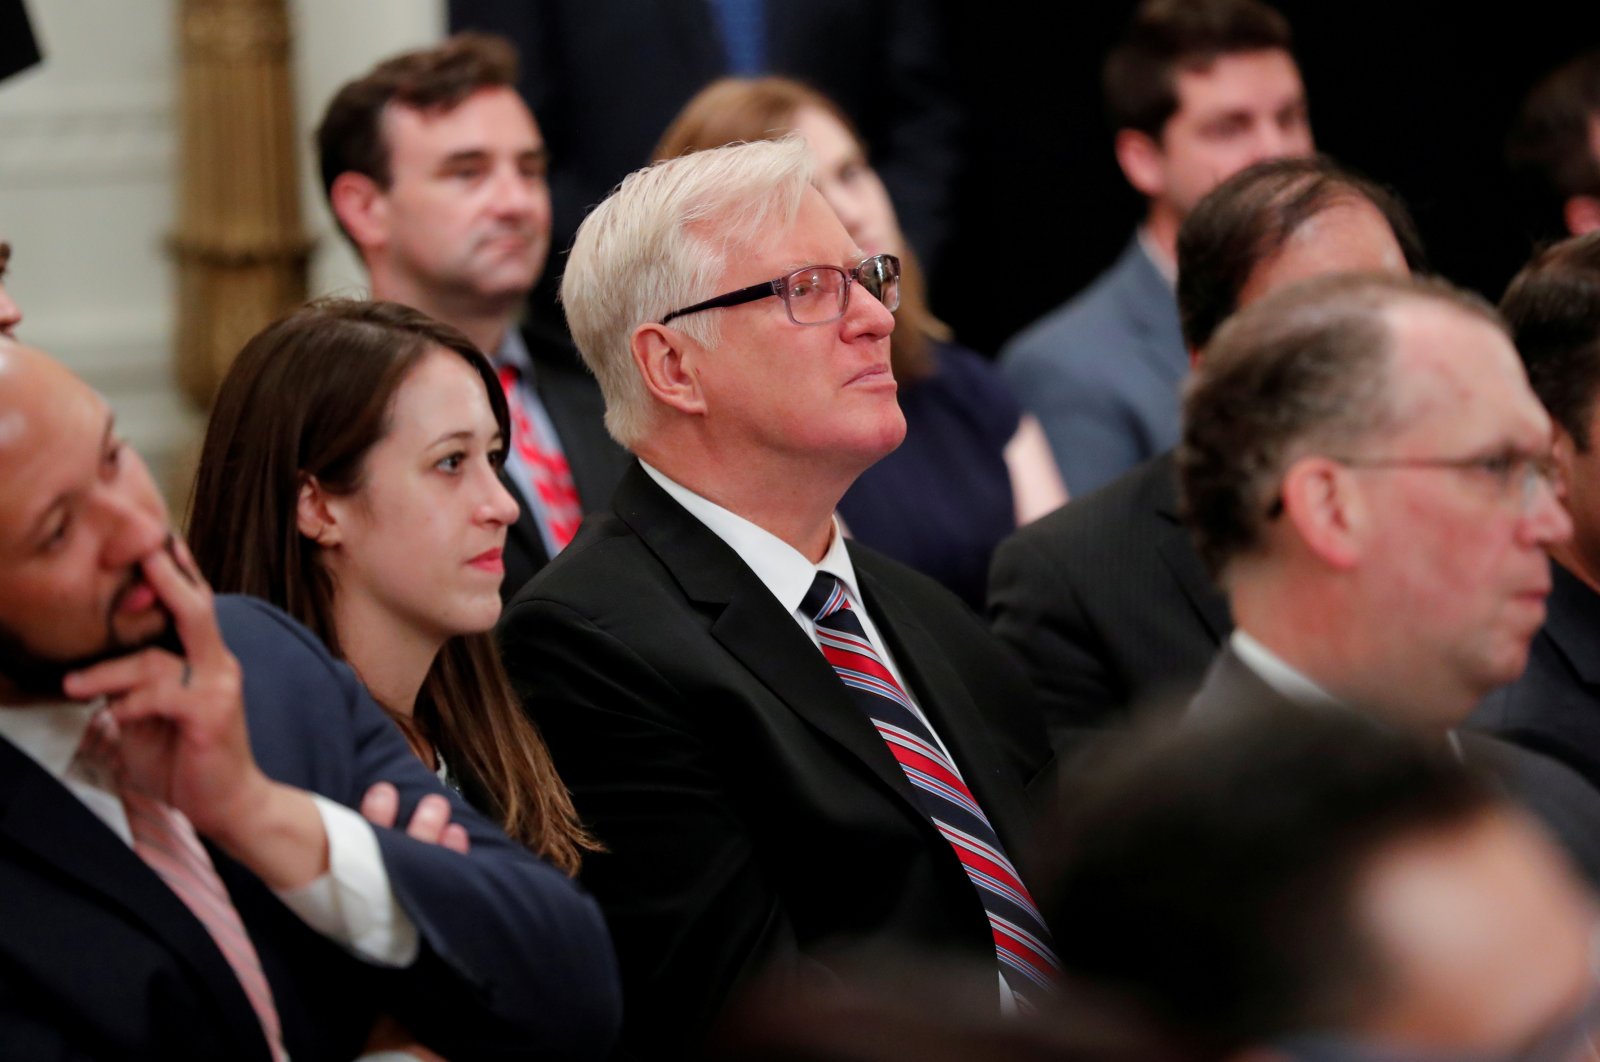 Gateway Pundit publisher Jim Hoft listens as U.S. President Donald Trump speaks during a "social media summit" meeting with prominent conservative social media figures in the East Room of the White House in Washington, U.S., July 11, 2019. (Reuters Photo)